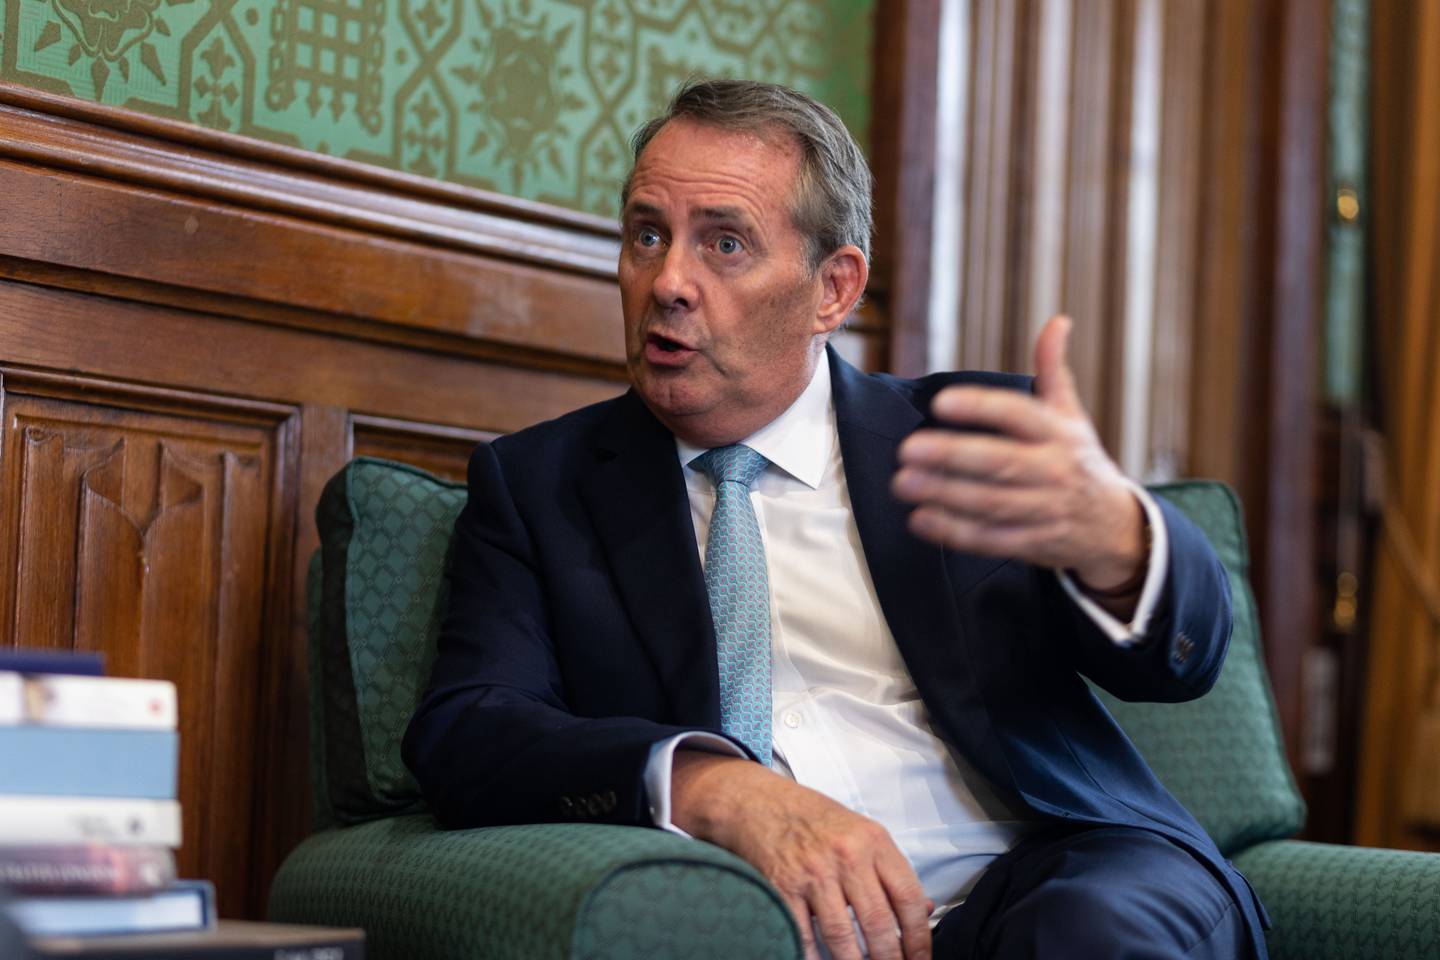 Liam Fox in his parliamentary office last year before hosting an event with the ambassadors from Isreal, Bahrain and UAE.